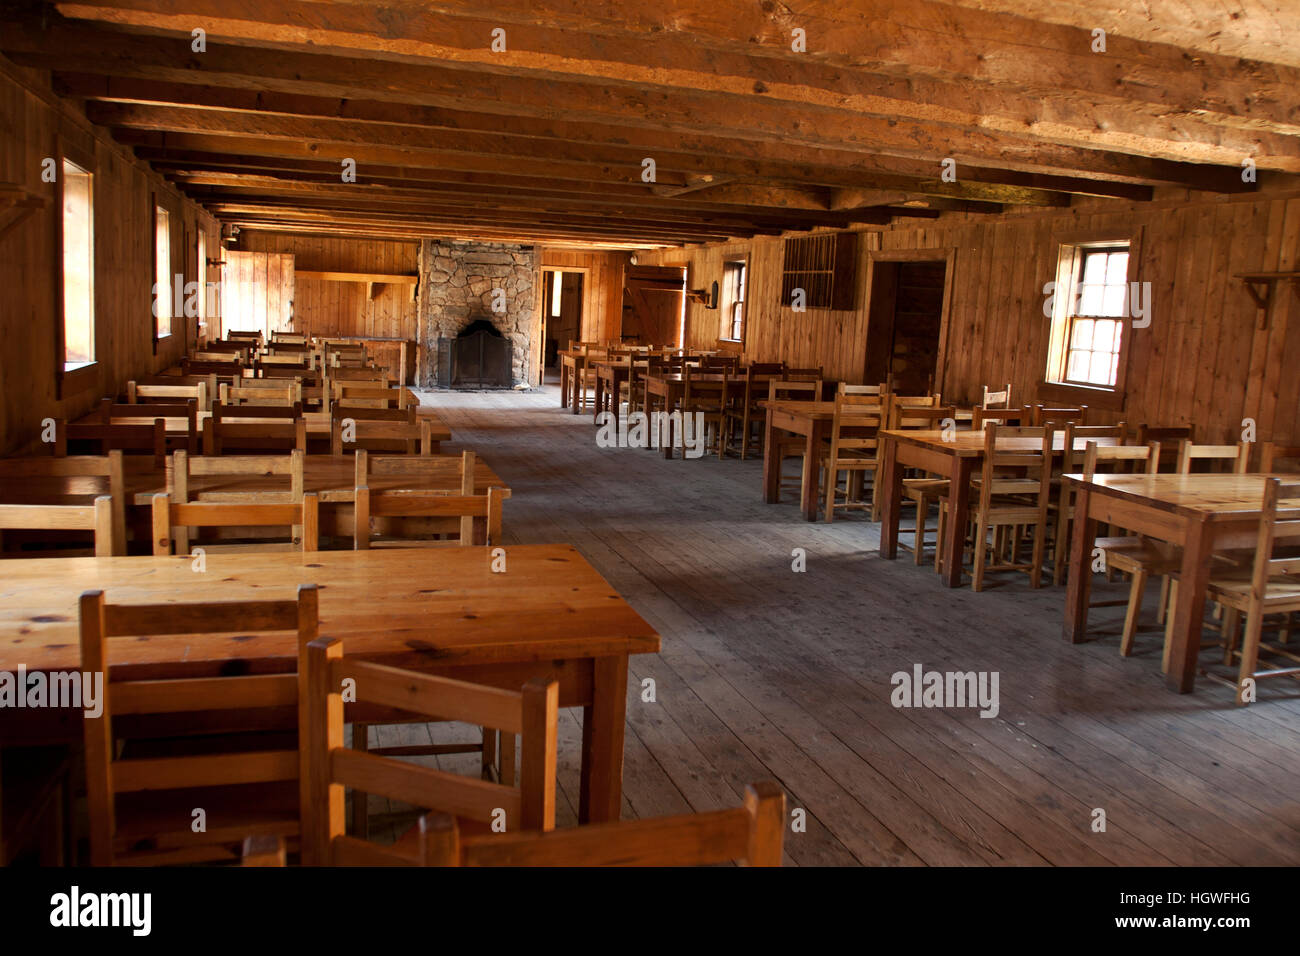 Fort Edmonton, Alberta, Canada, British fort that became Edmonton, interior of a log dining and meeting room Stock Photo